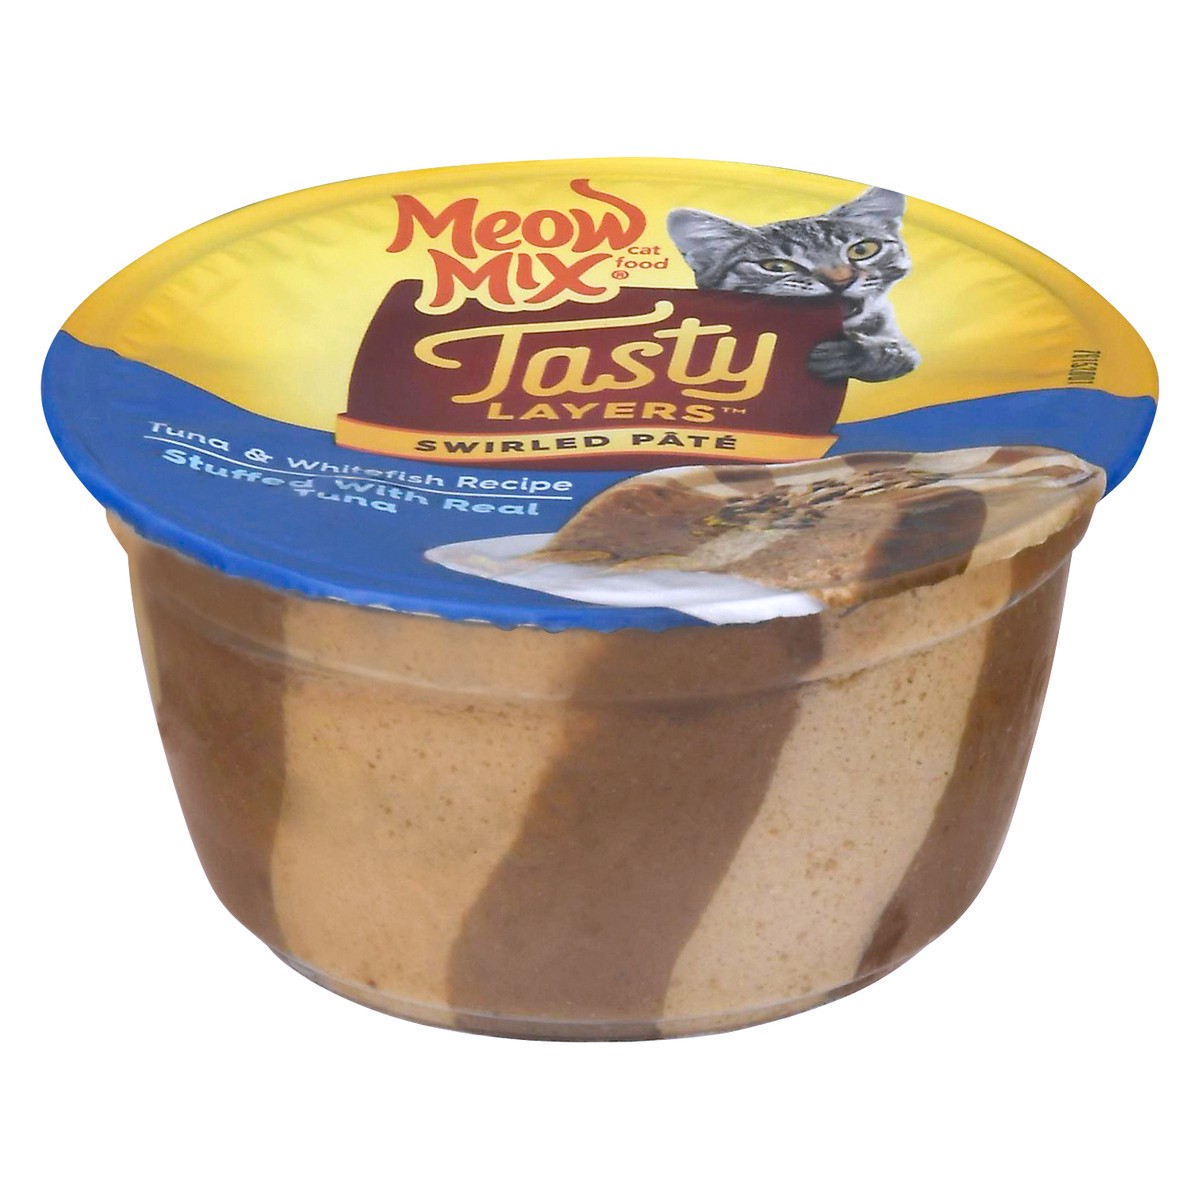 slide 1 of 10, Meow Mix Tasty Layers Swirled Paté Tuna and Whitefish Recipe Stuffed with Real Tuna Wet Cat Food, 2.75 oz